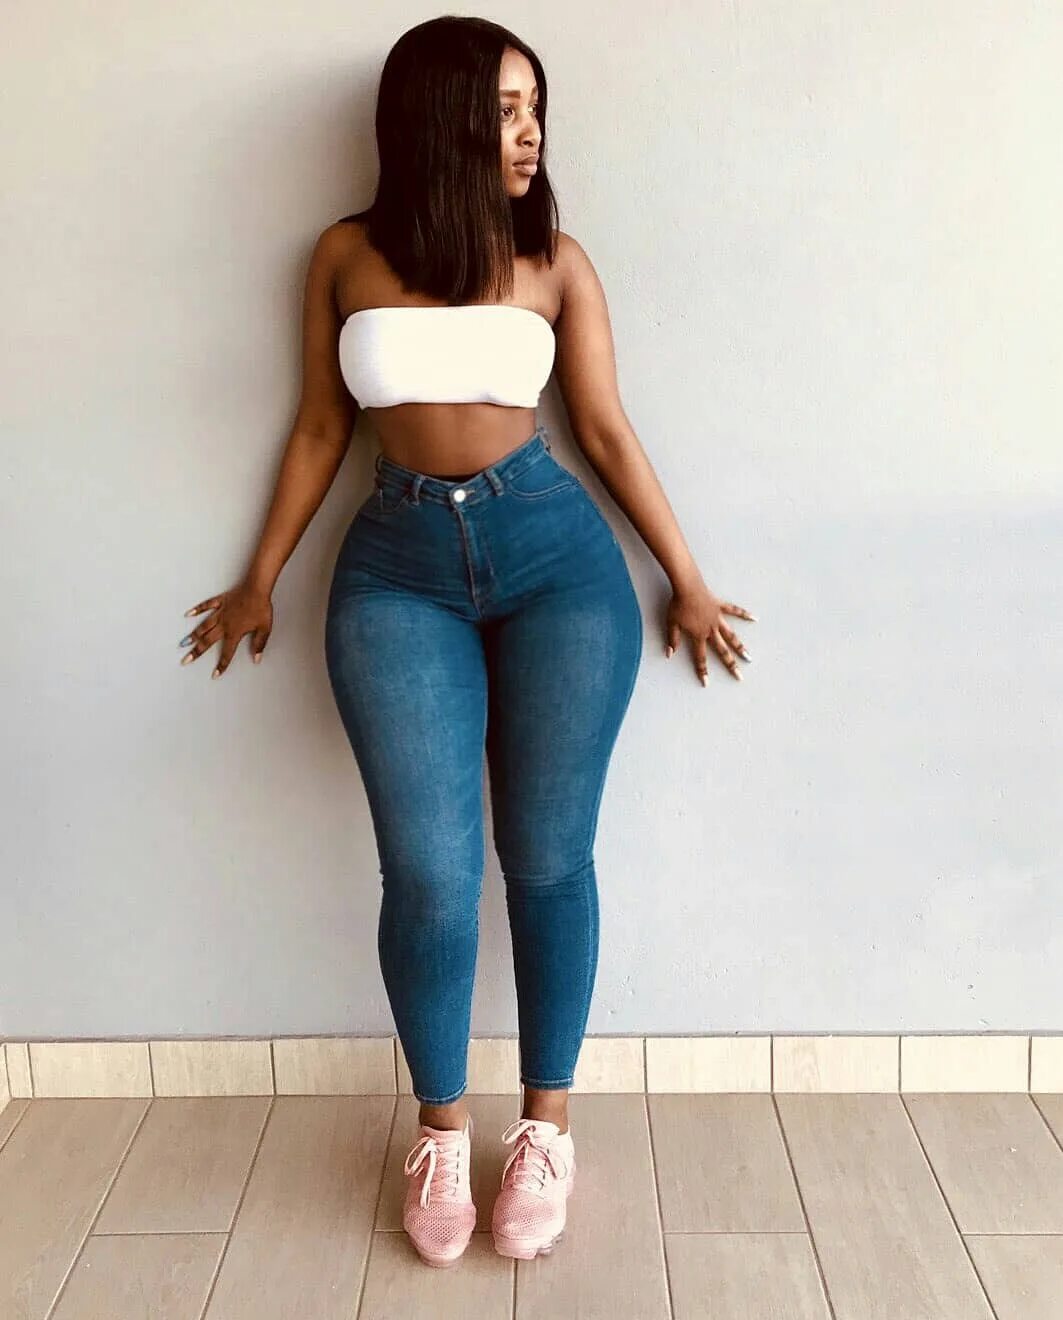 Thick tall